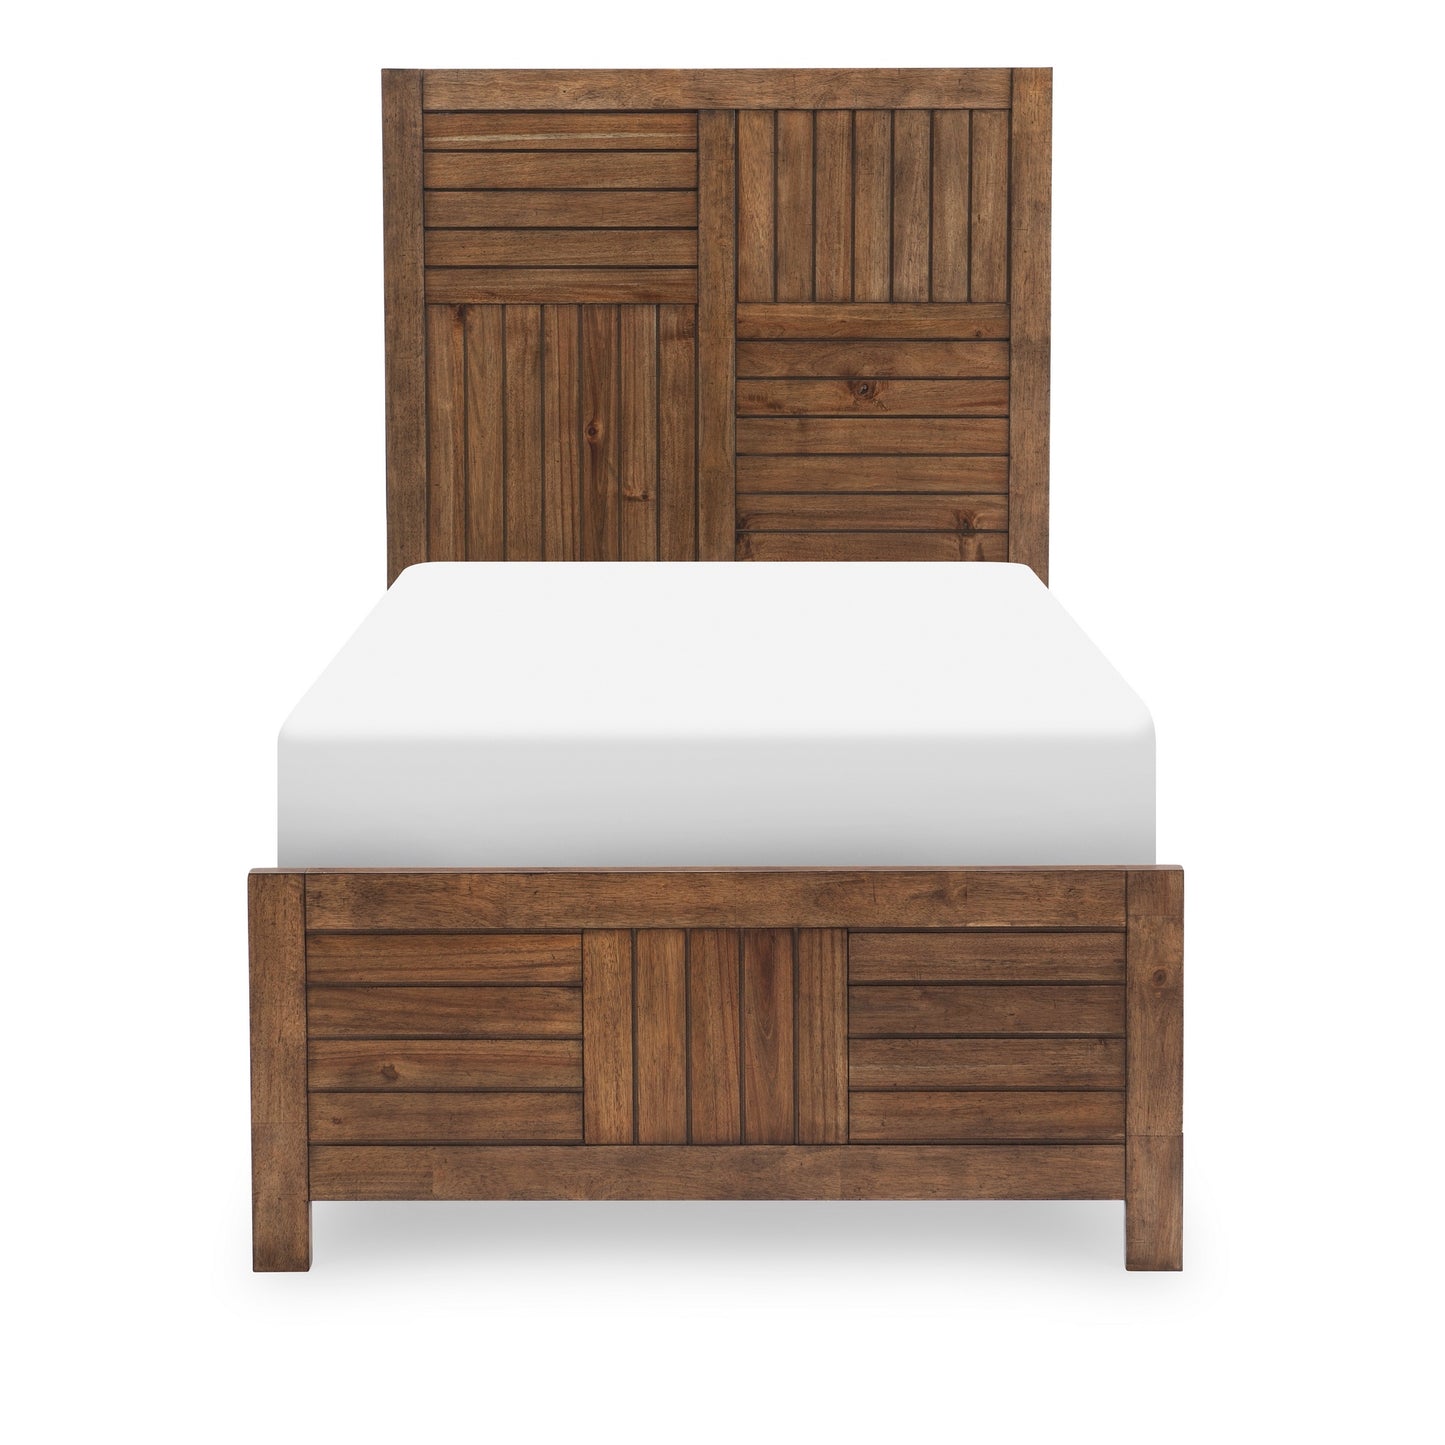 Summer Camp Twin Panel Bed - Brown